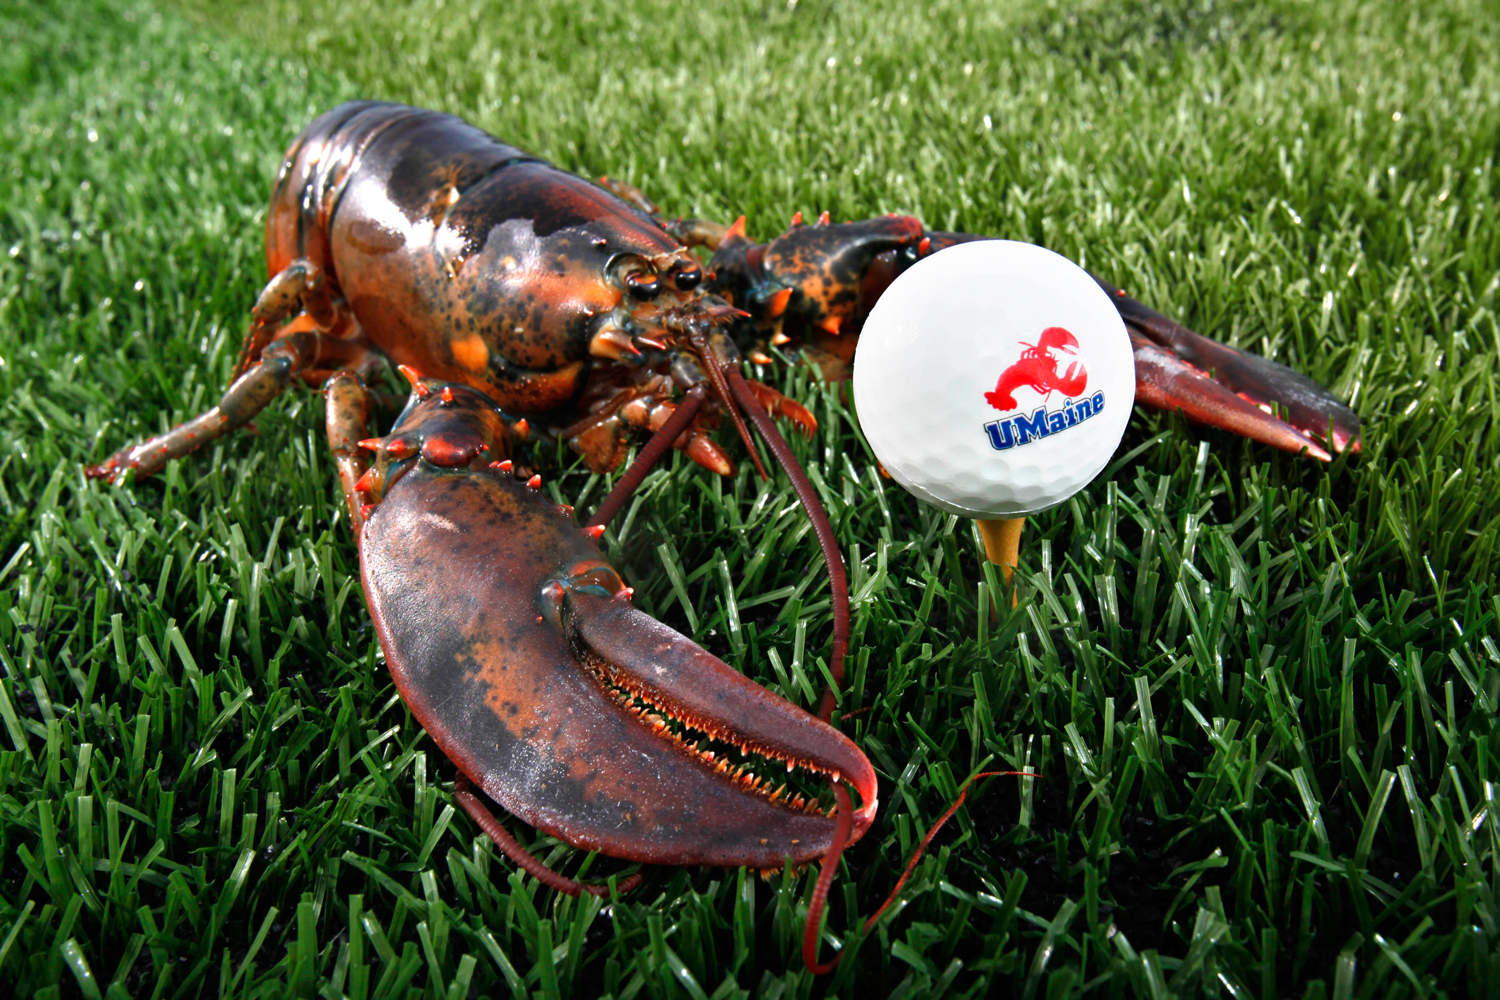 In this March 31, 2011, photo, a lobster is posed next to a golf ball made from ground lobster shells in Orono, Maine. (Robert F. Bukaty – AP)